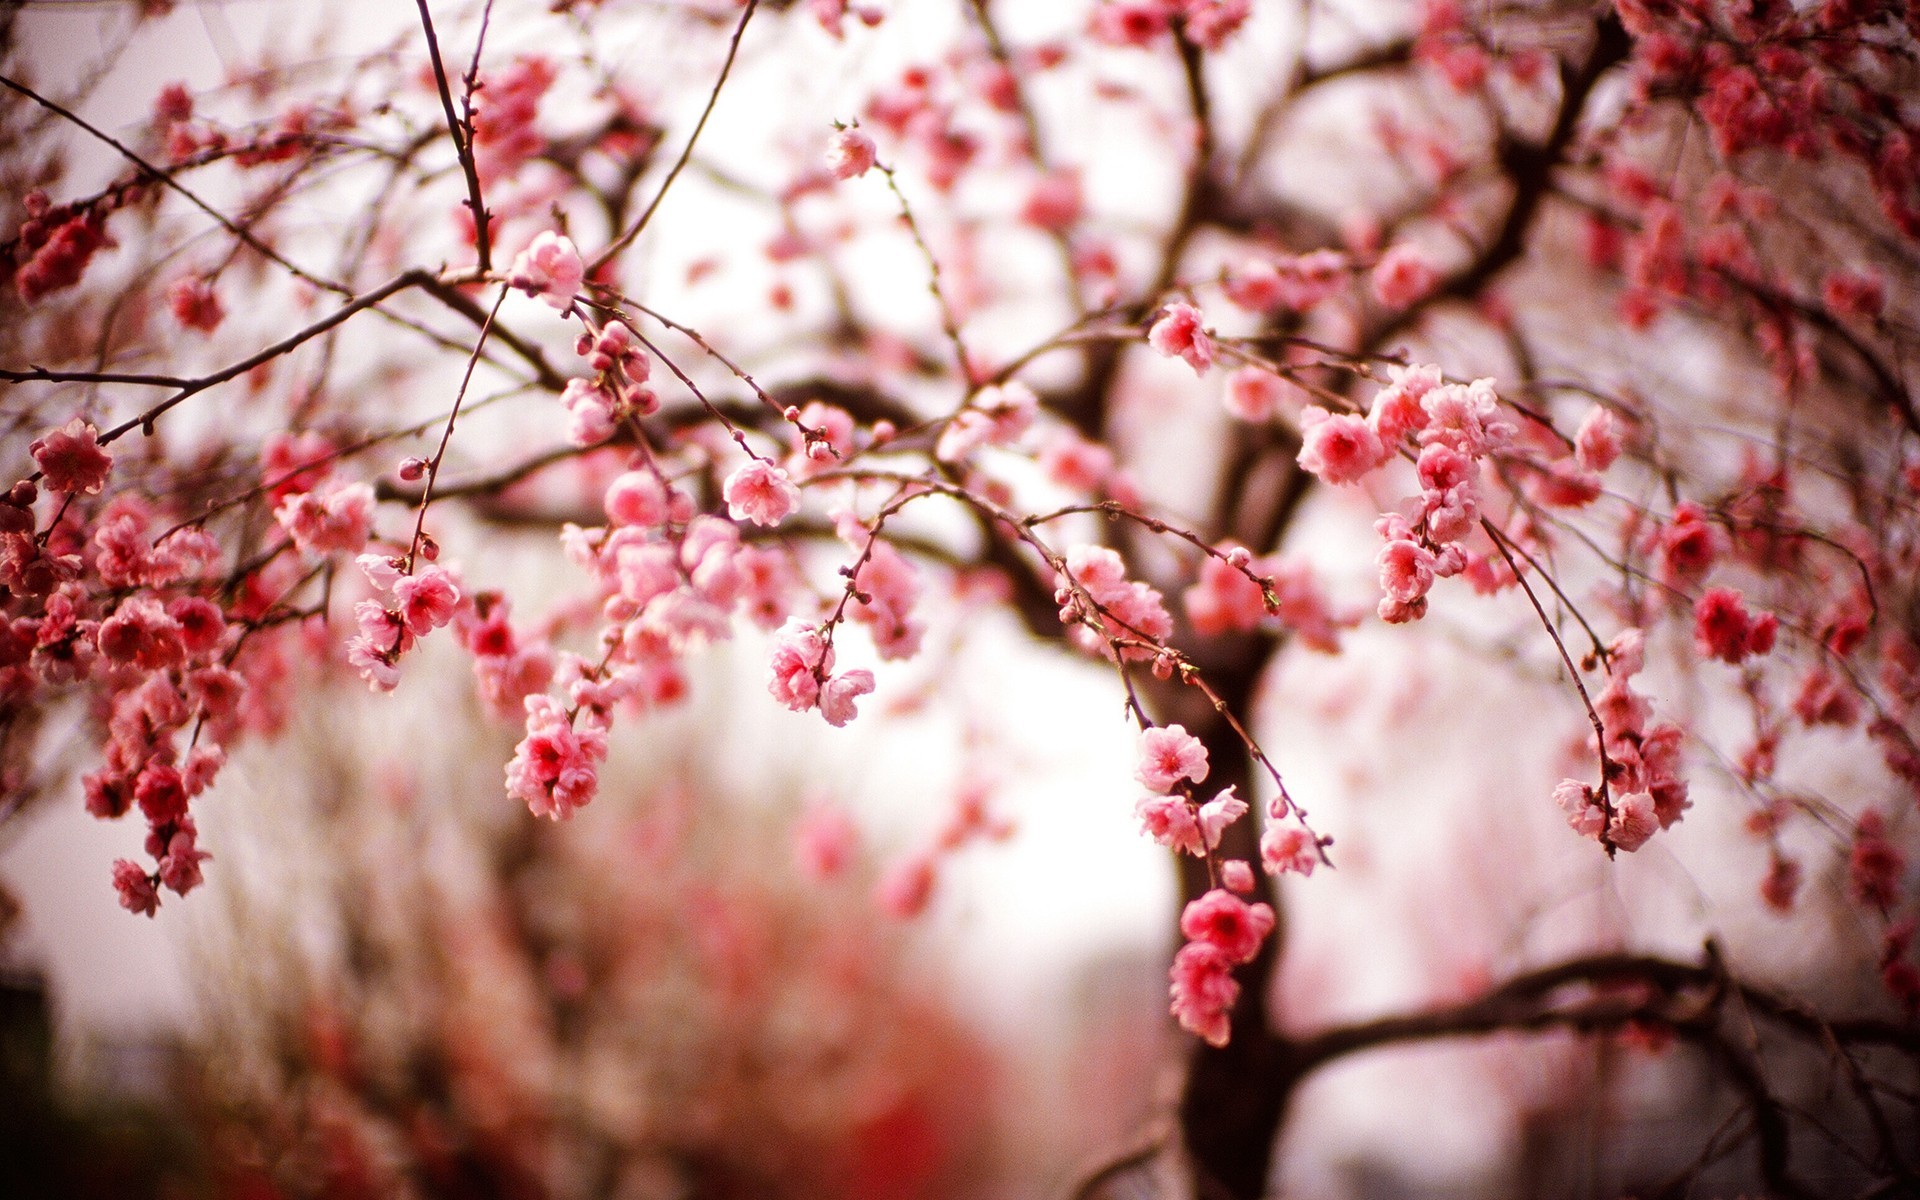 General 1920x1200 trees photography cherry blossom macro plants outdoors